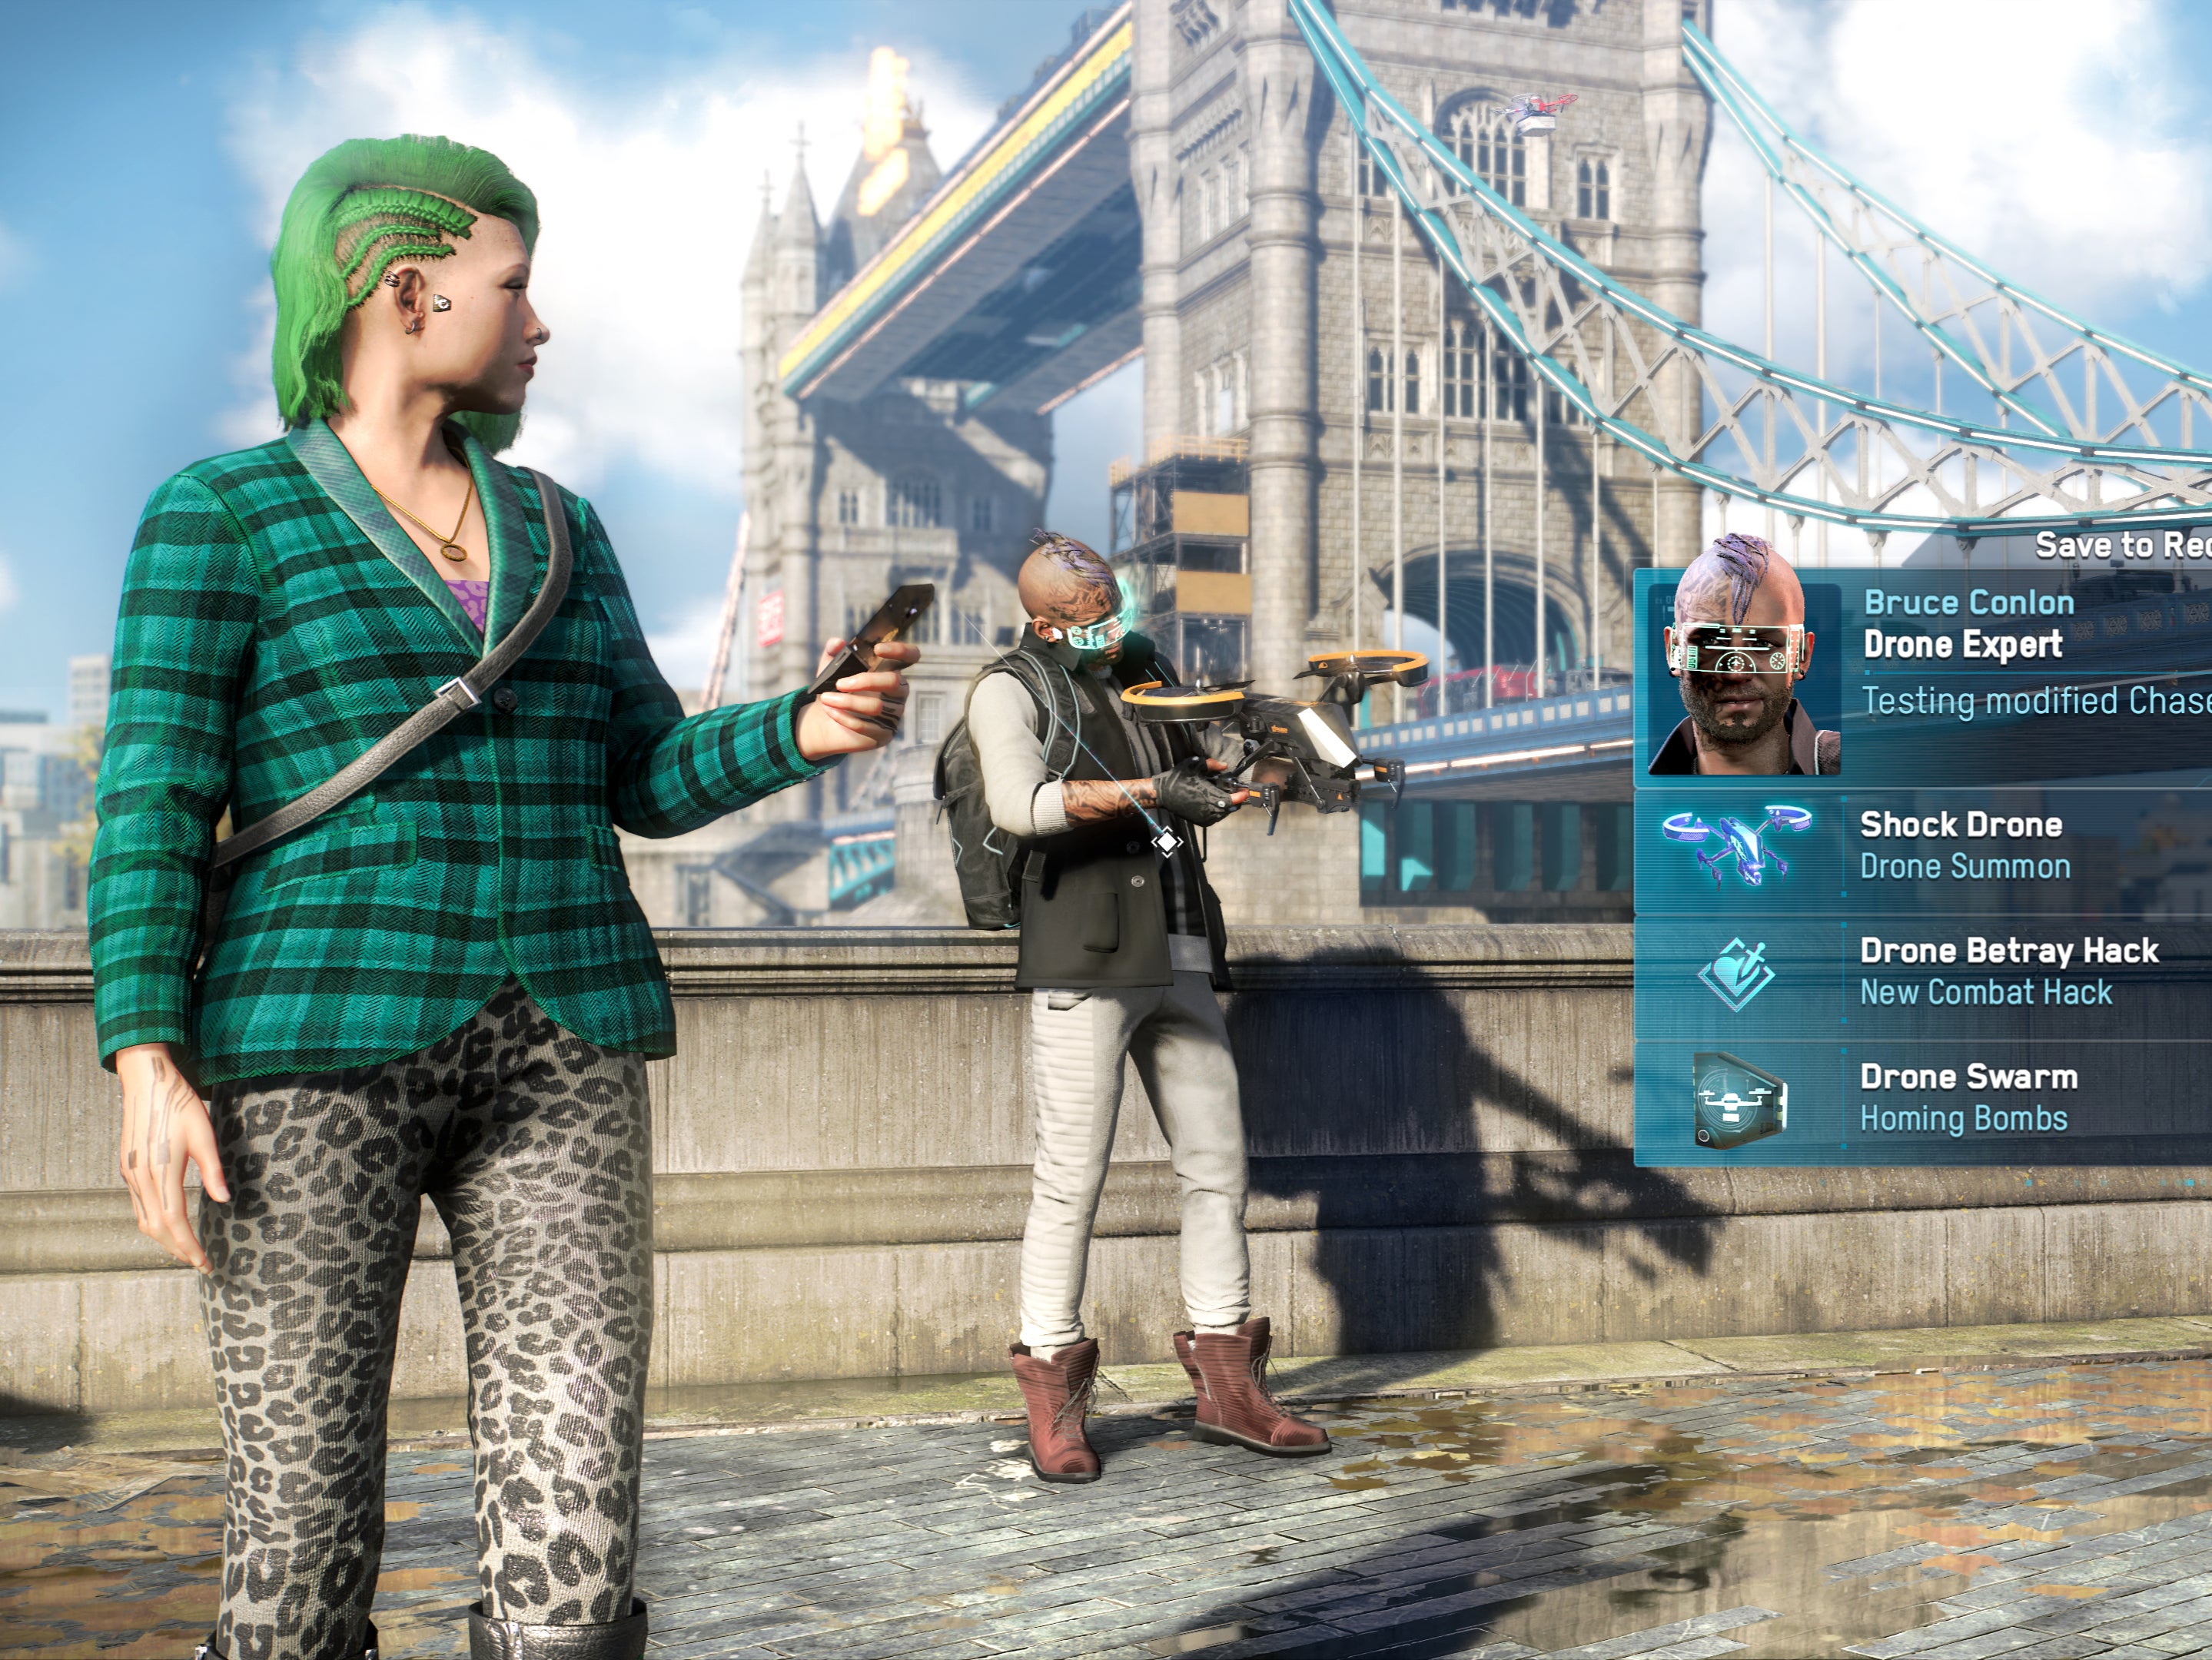 Who let the dogs out? ‘Watch Dogs: Legion’ lets you play as every person in London